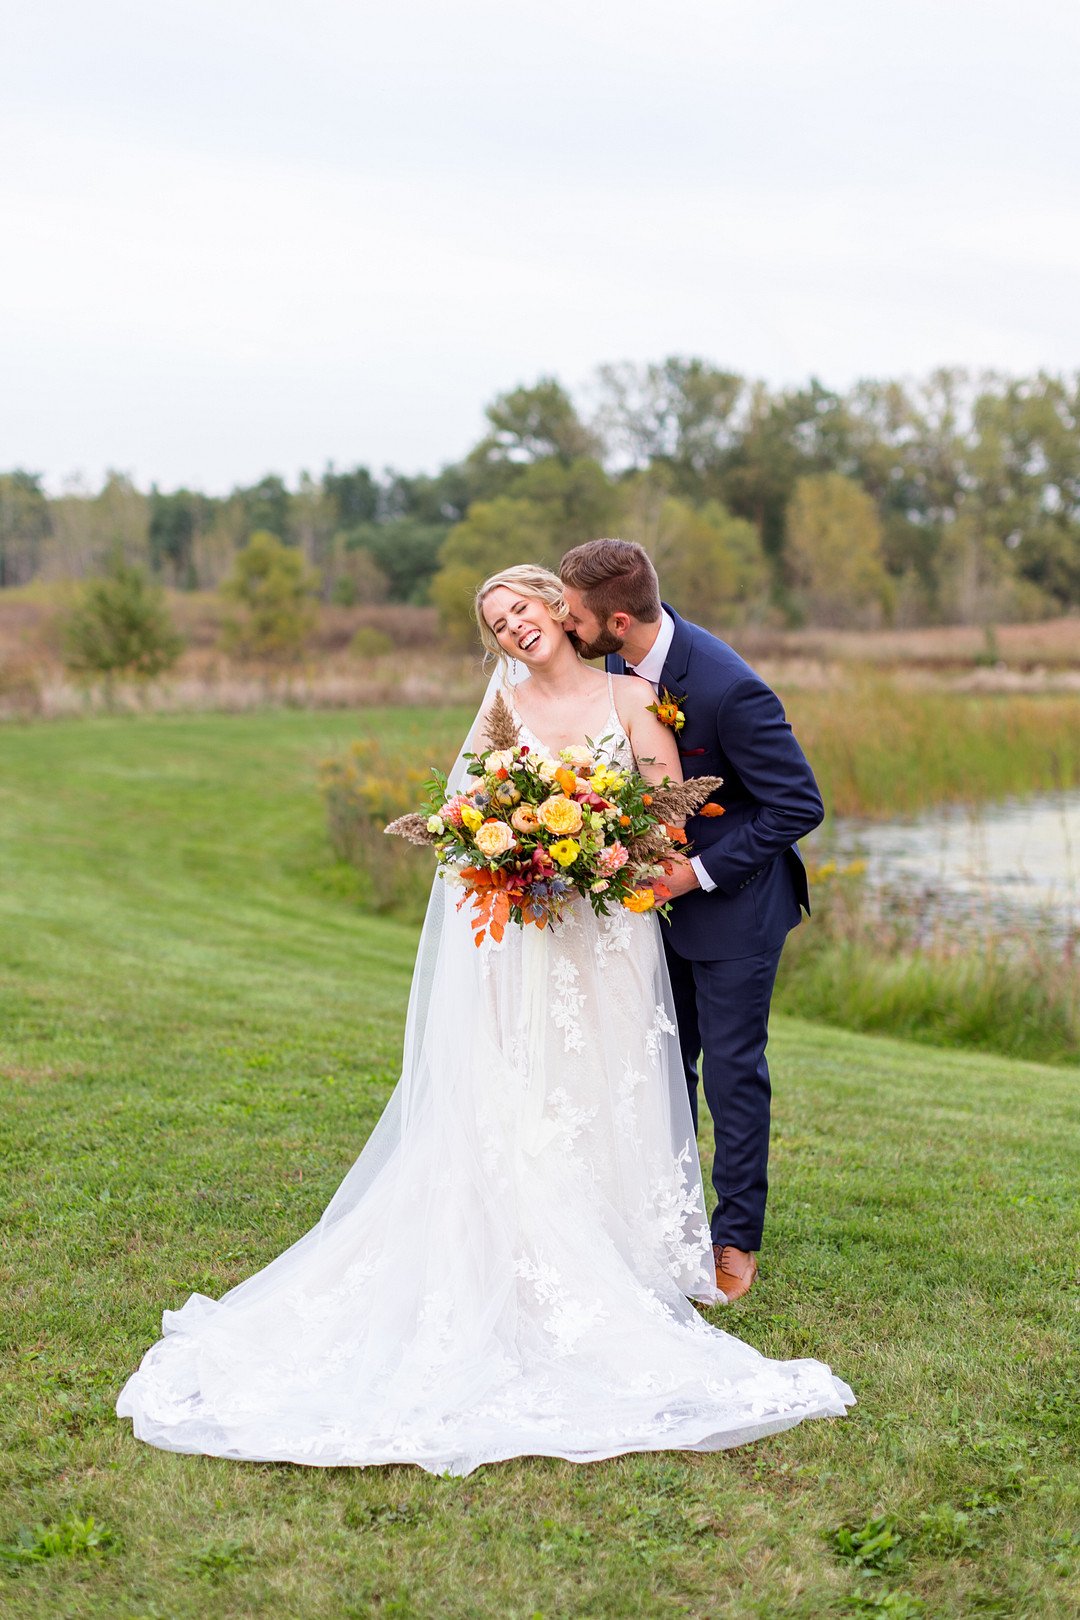 Anderson_Rand_Grace Rios Photography _perfect-fall-wedding-at-emerson-creek-39_low.jpg